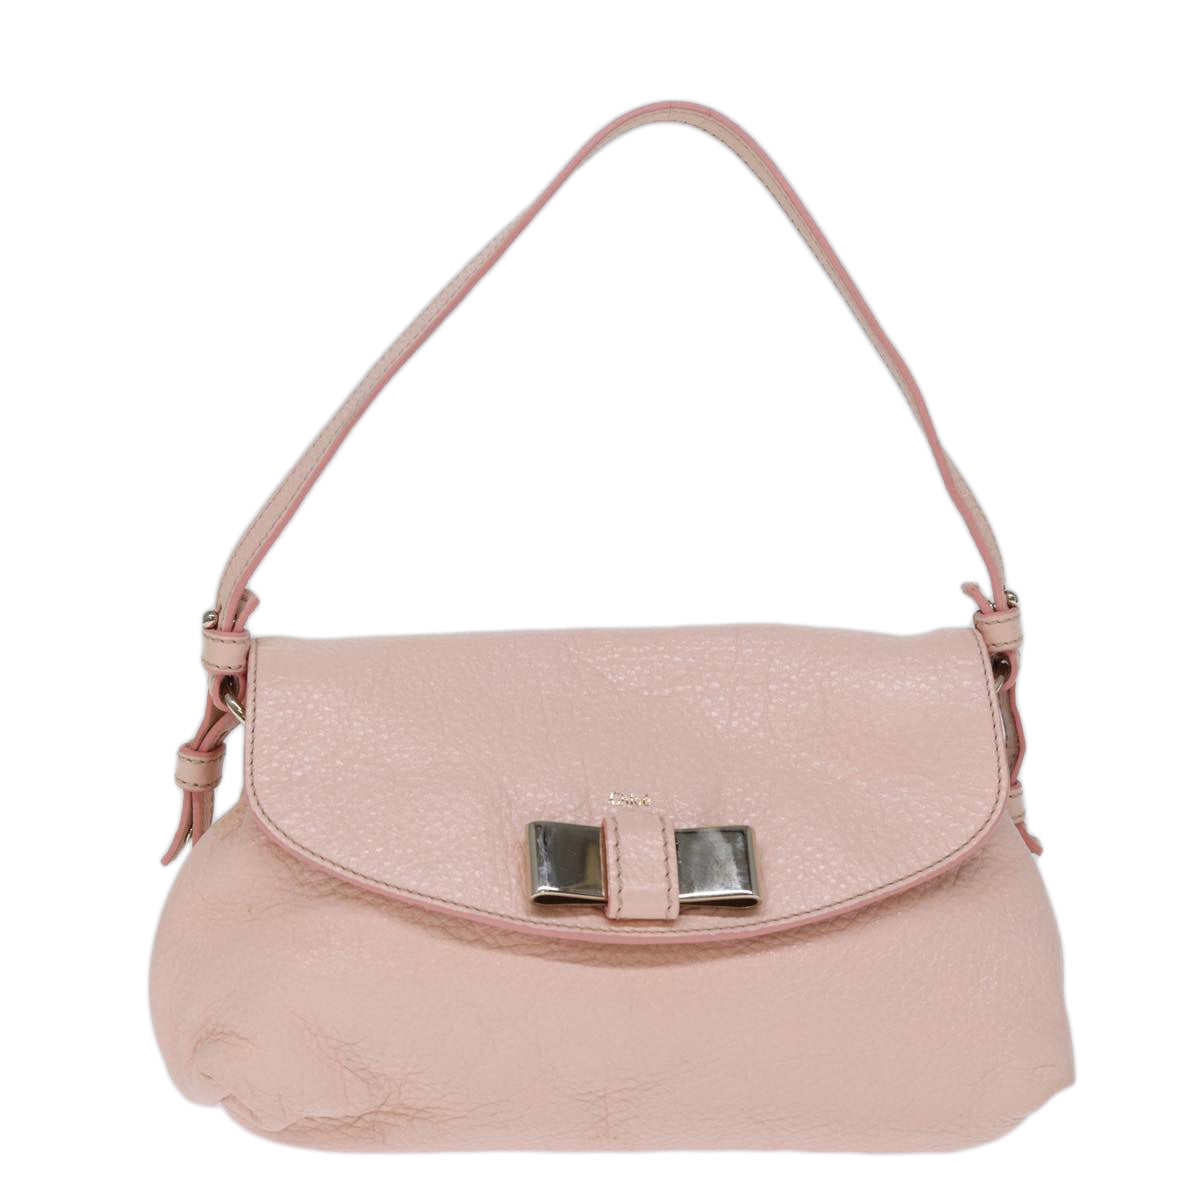 Chloe Lily Hand Bag Leather 2way Pink Auth yk12570 - 0